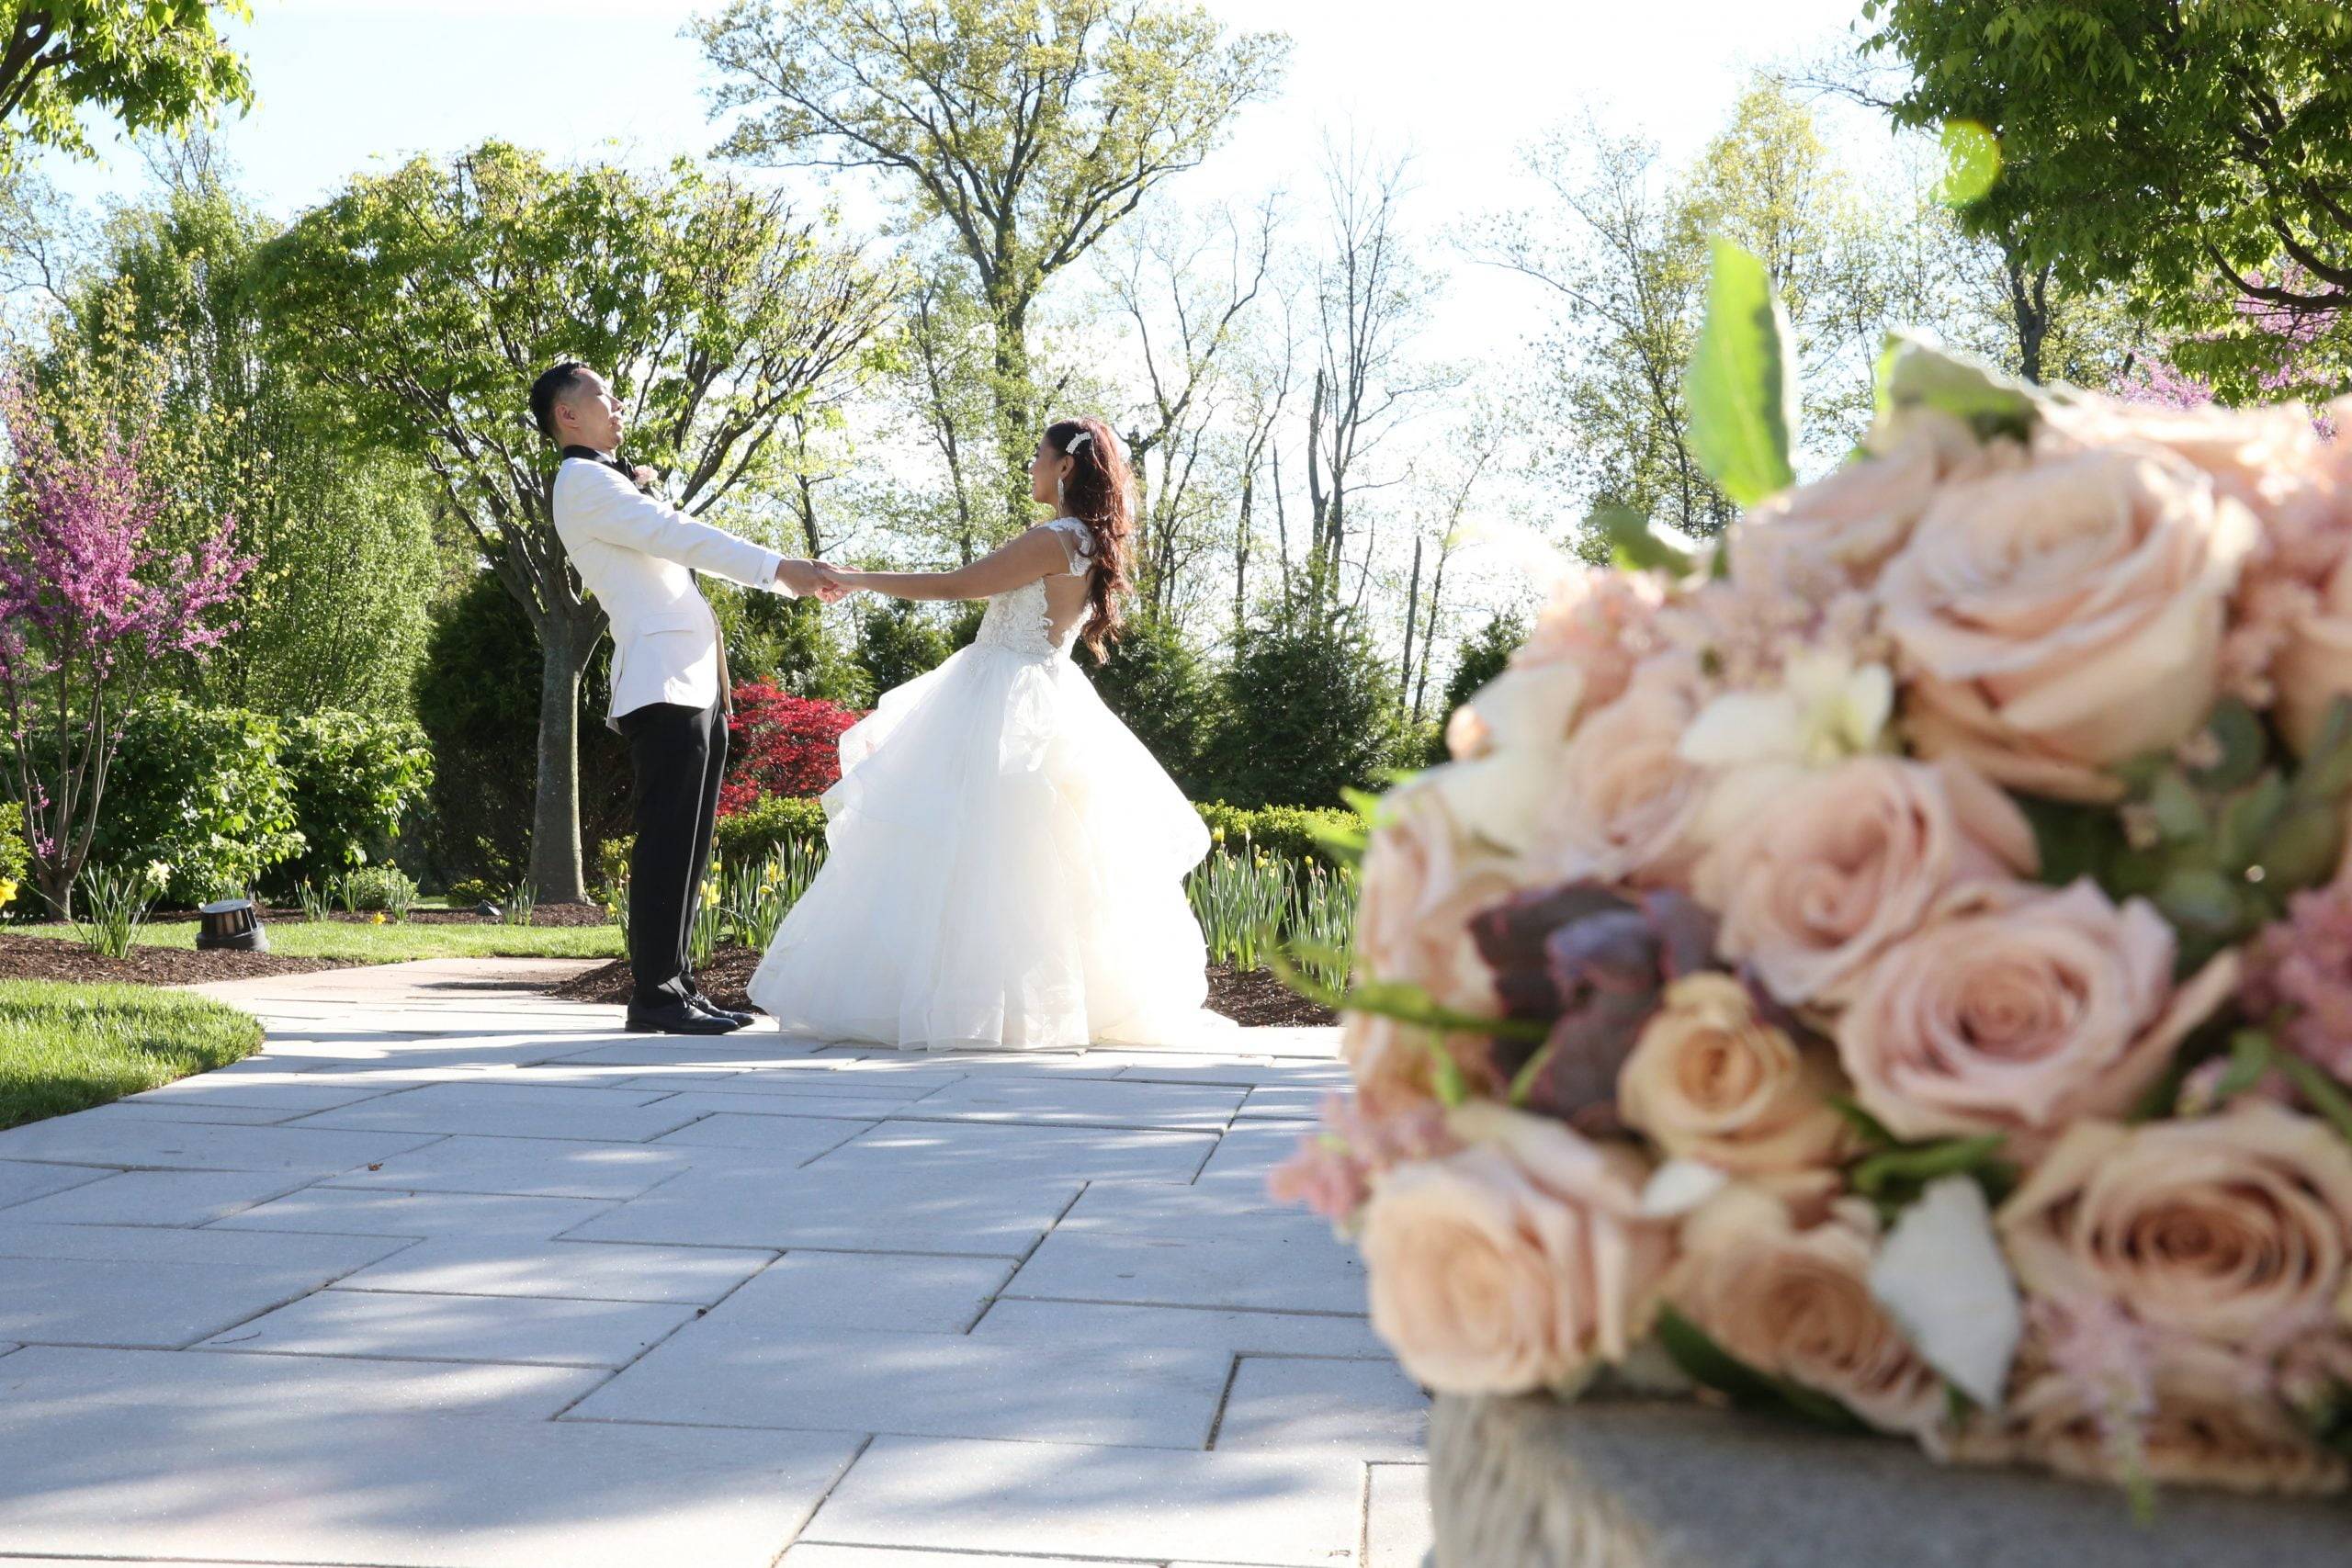 A bride and groom are walking down a path in a garden.